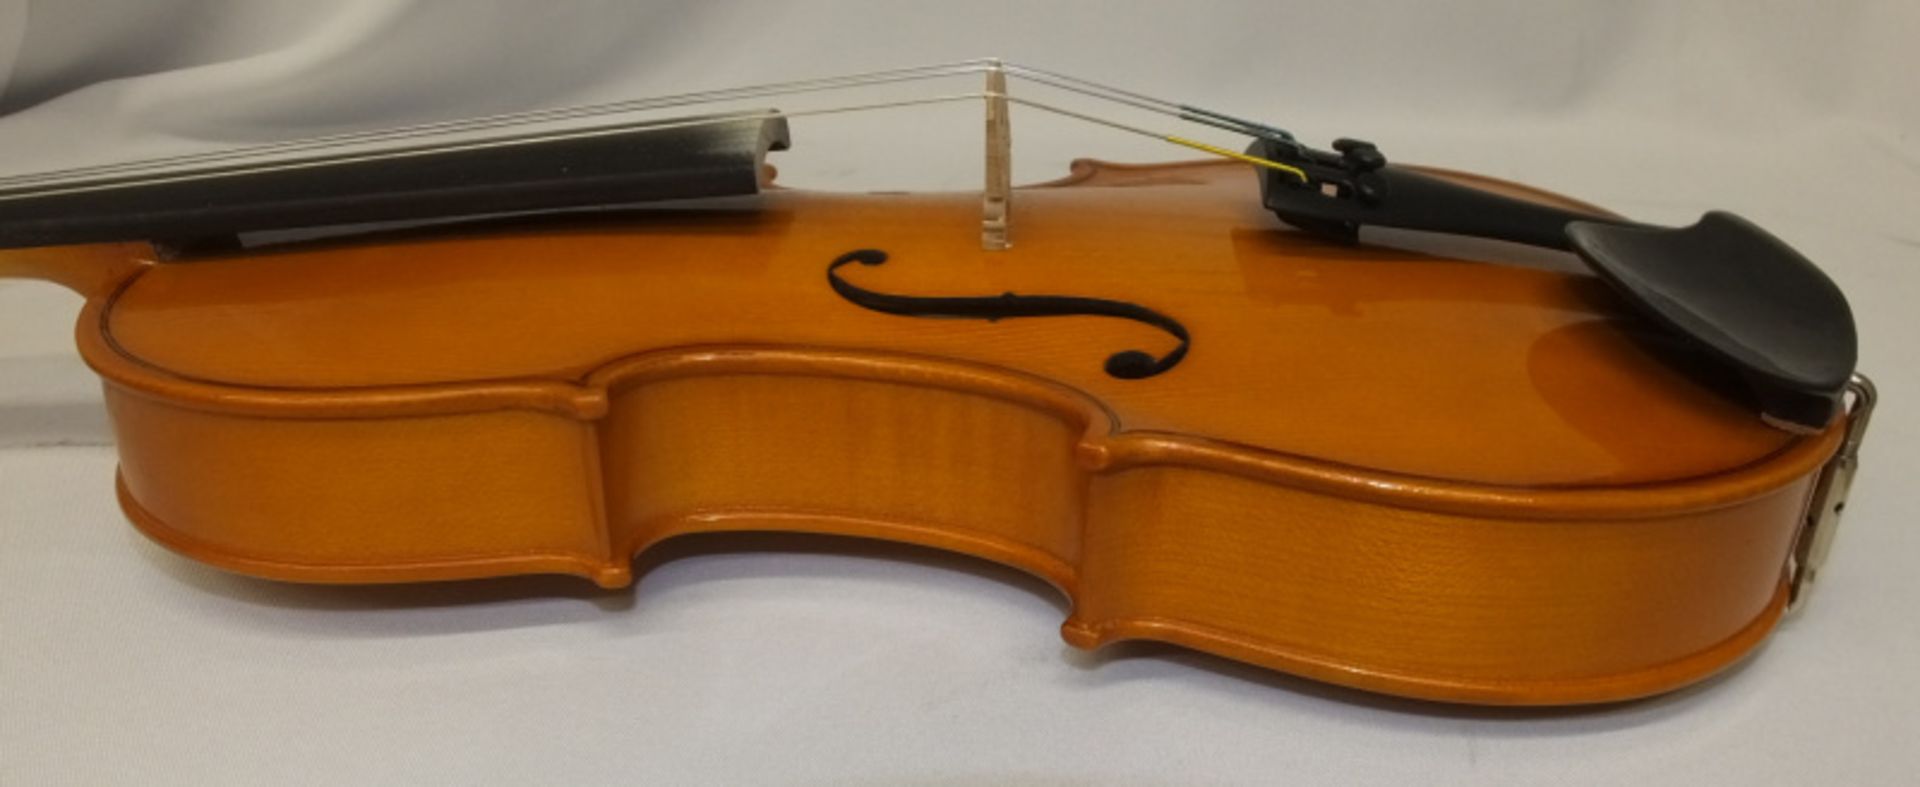 Andreas Zeller Violin & Case - Please check photos carefully for damaged or missing components - Image 7 of 17